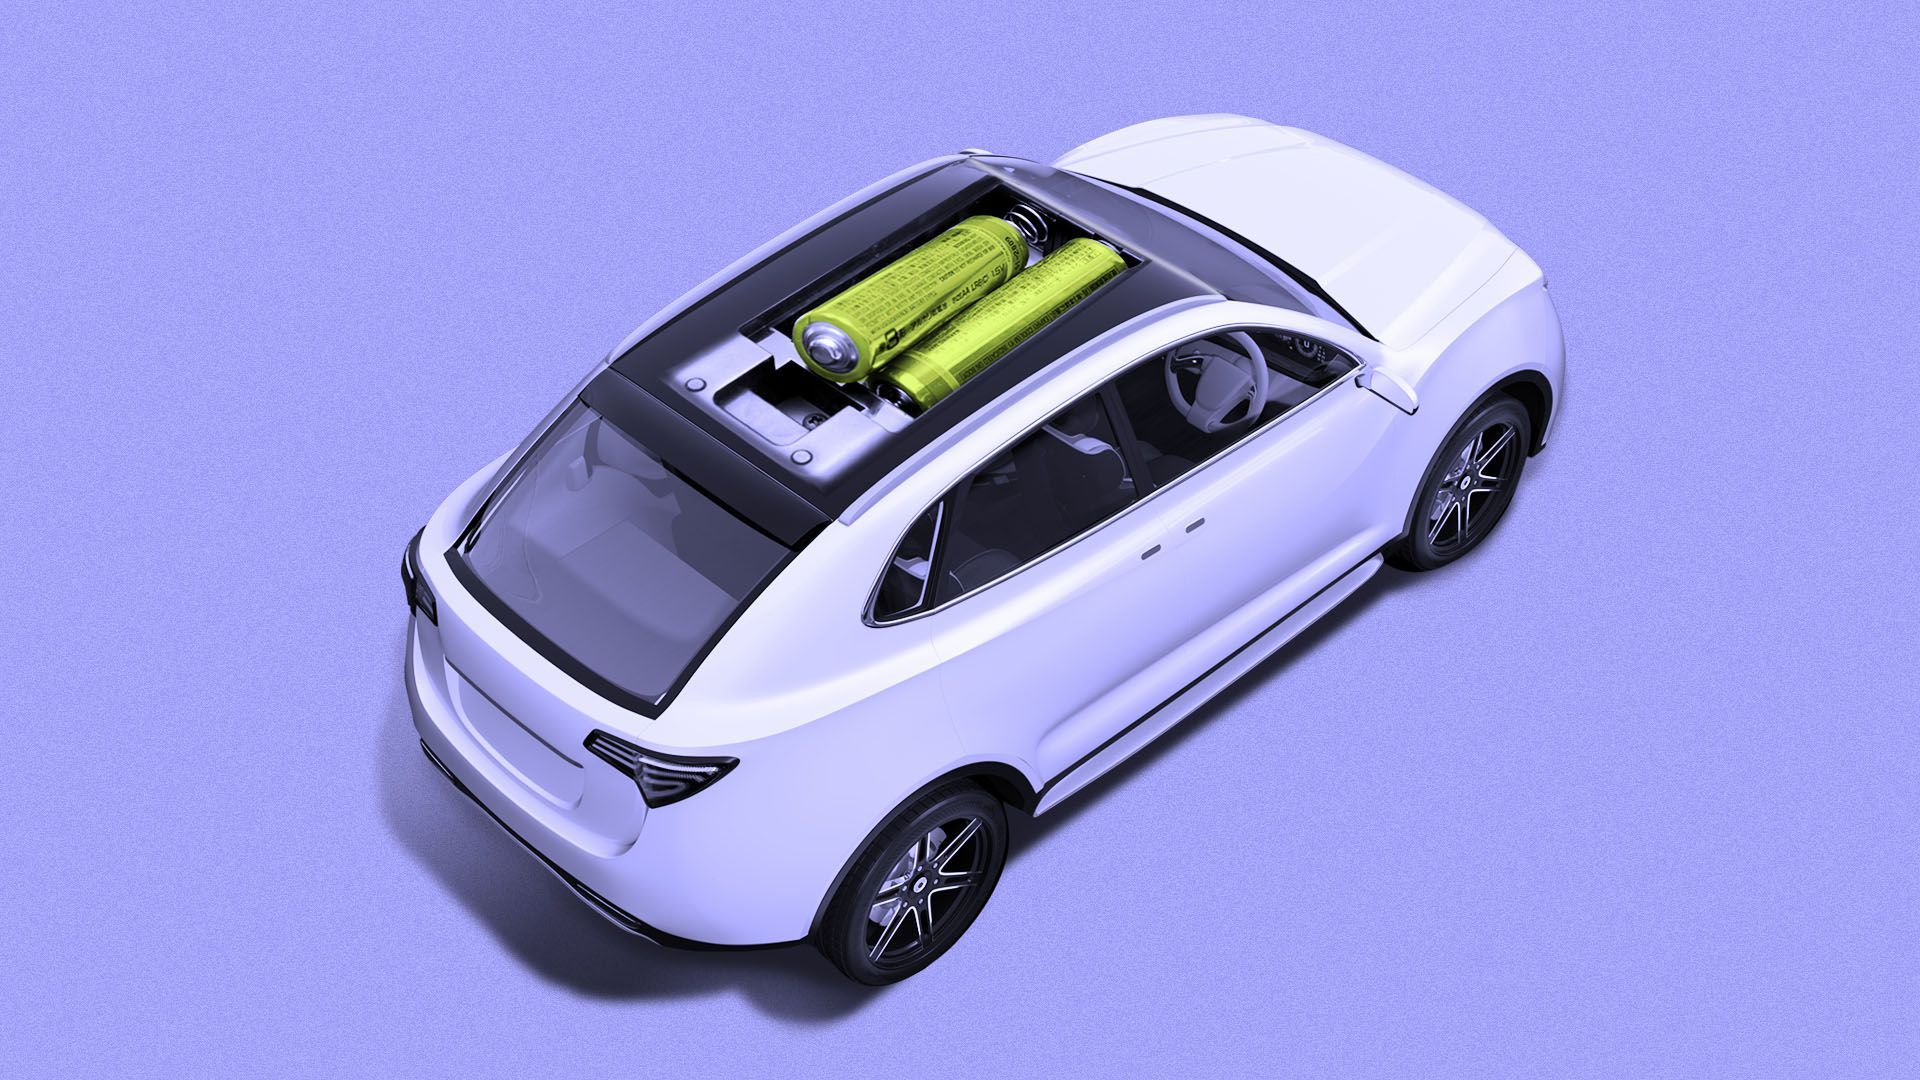 Illustration of car with batteries on top